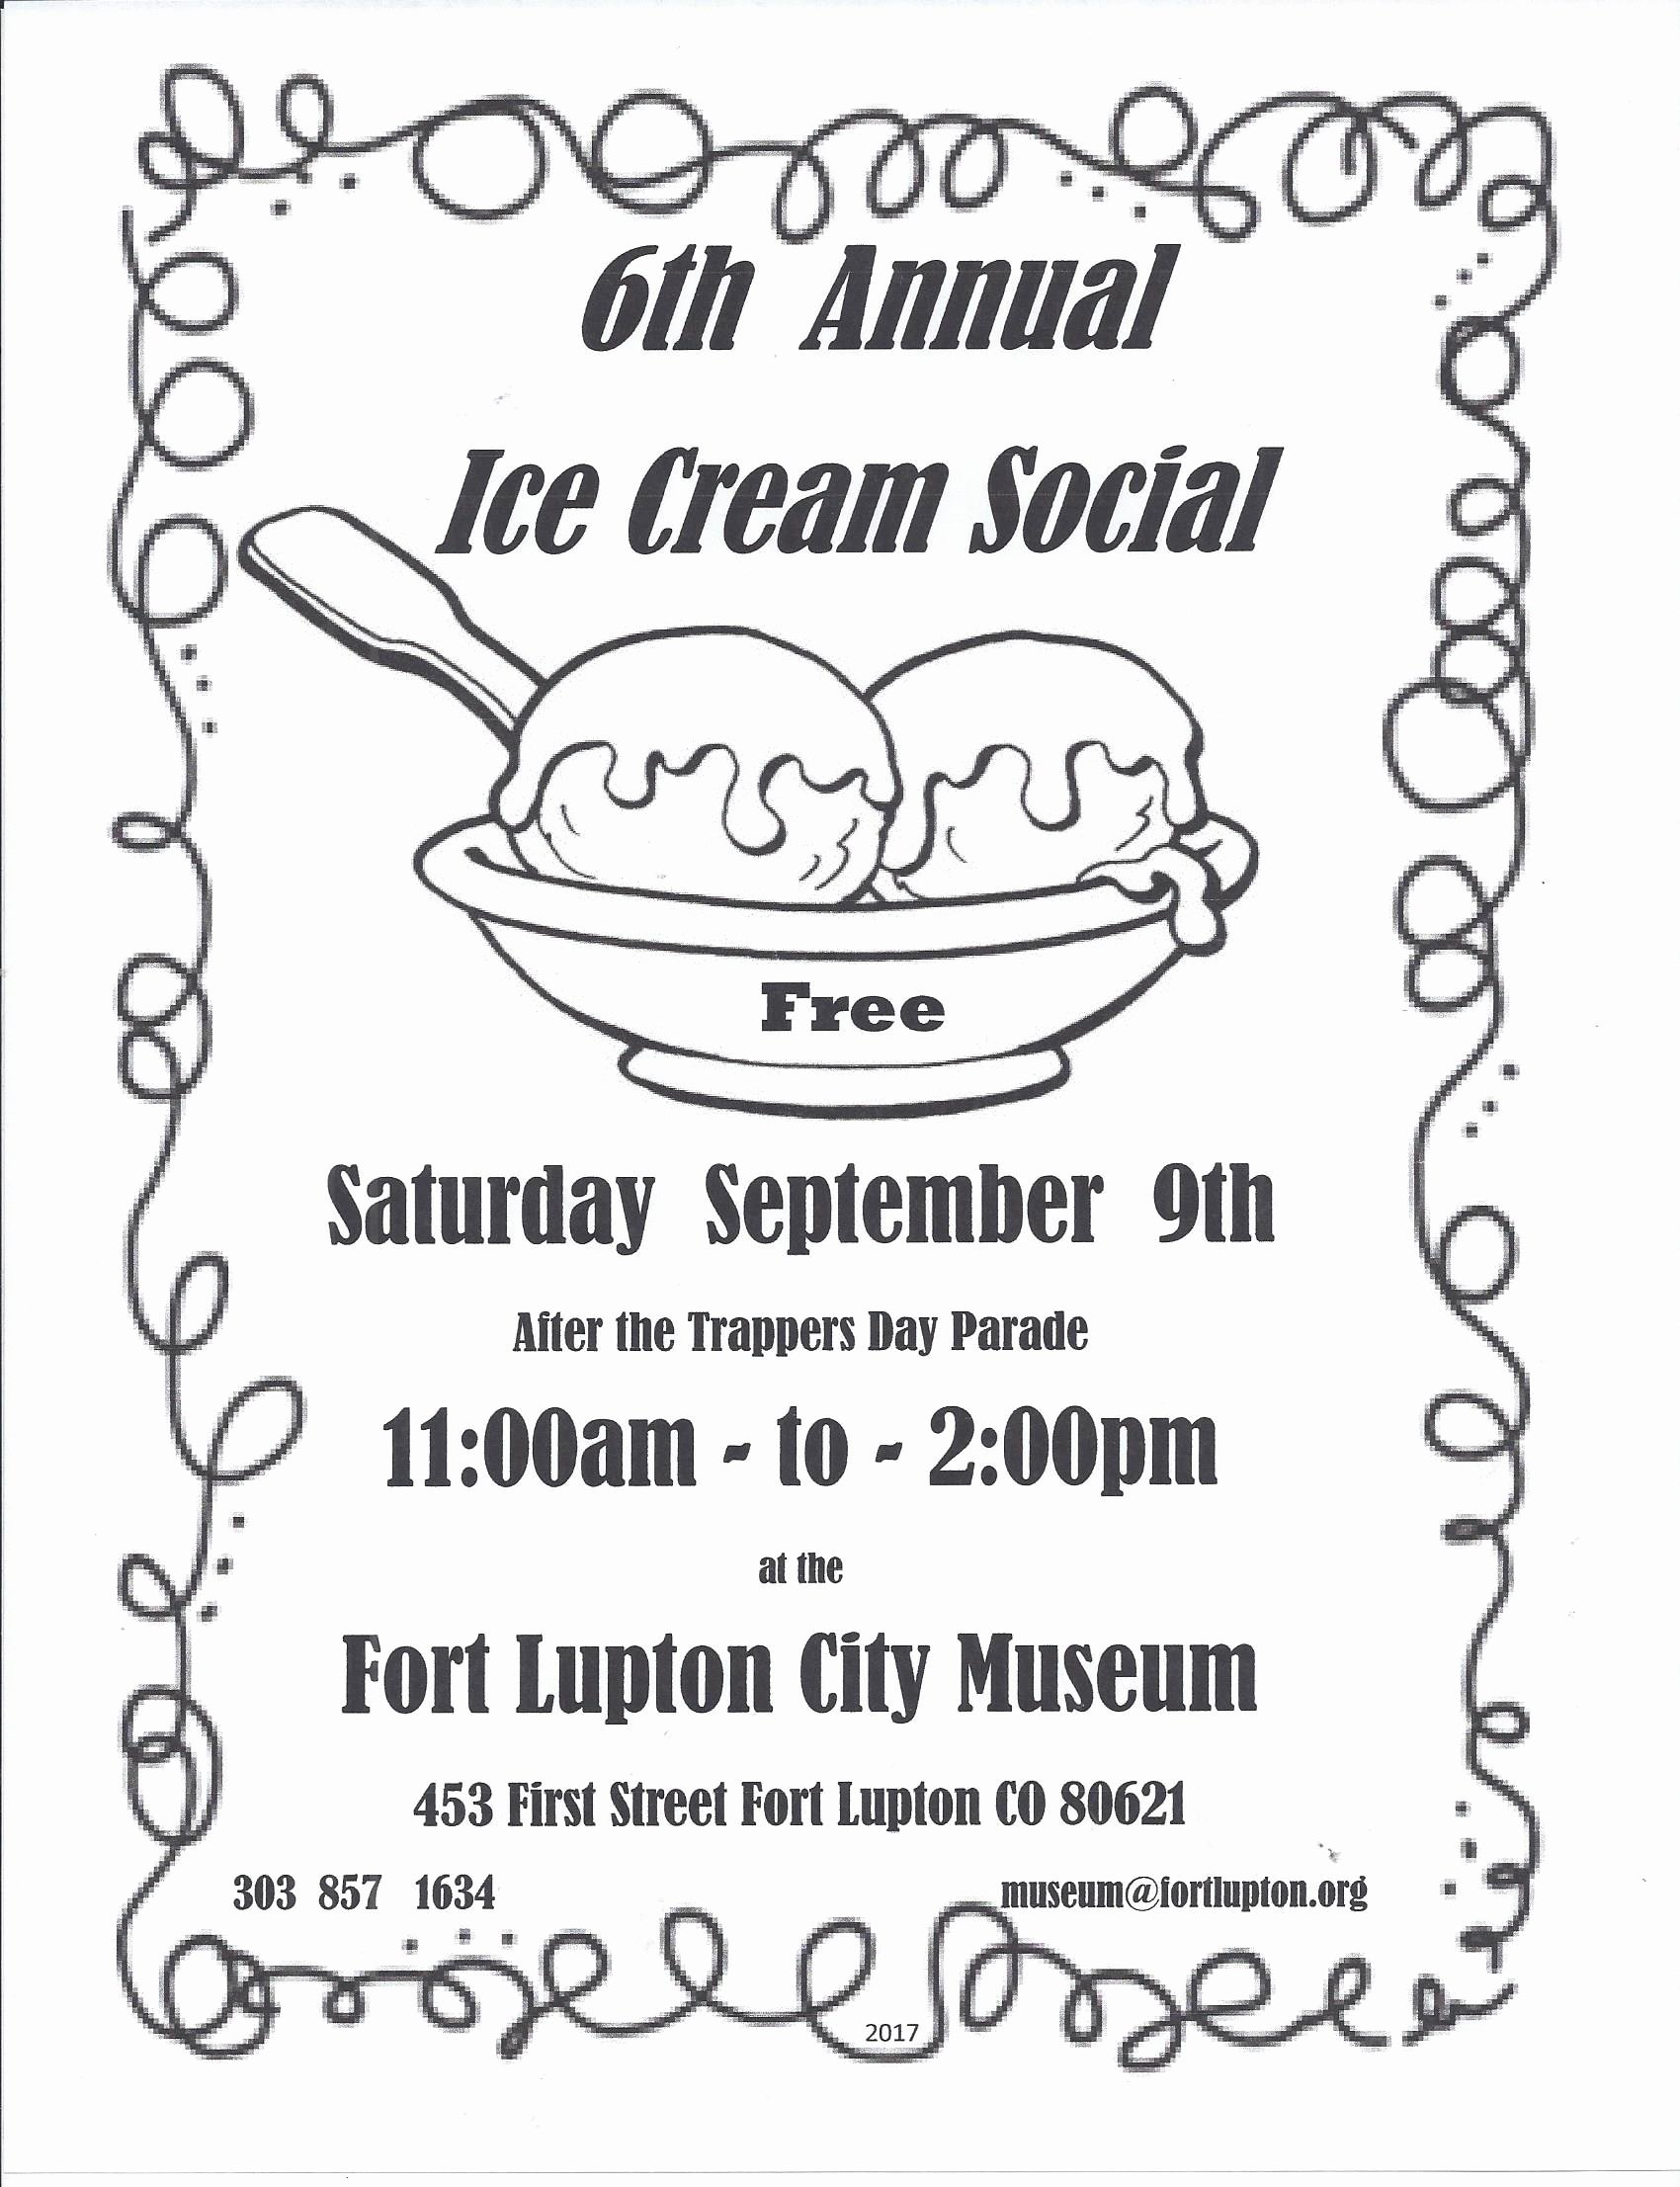 Ice Cream social Flyer Unique Ice Cream social Flyer 2017 fort Lupton Chamber Of Merce